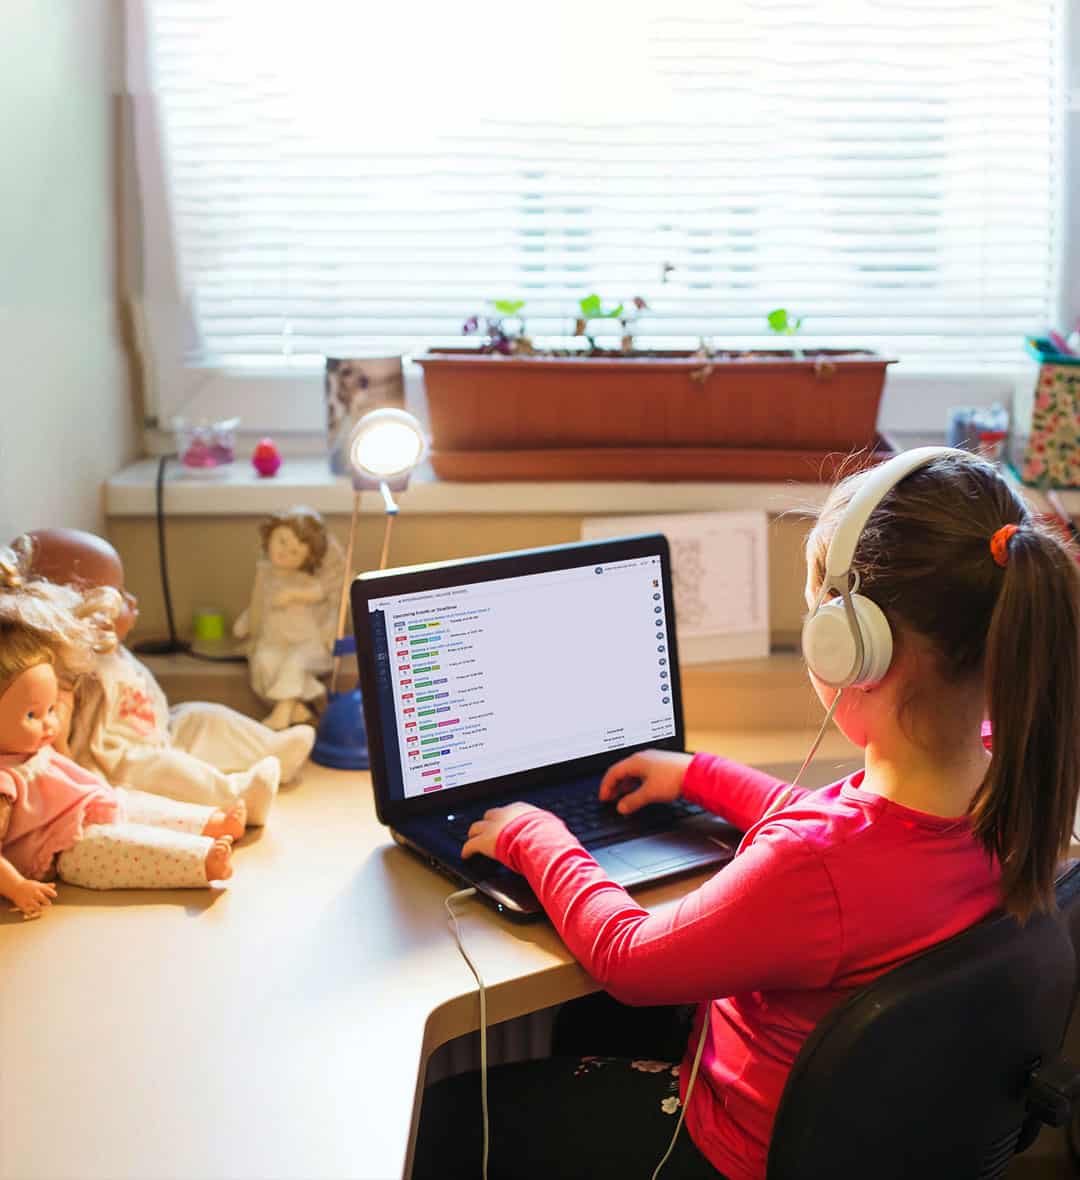 A girl in pink dress wearing headset typing in laptop with few toys beside the laptop  in the table